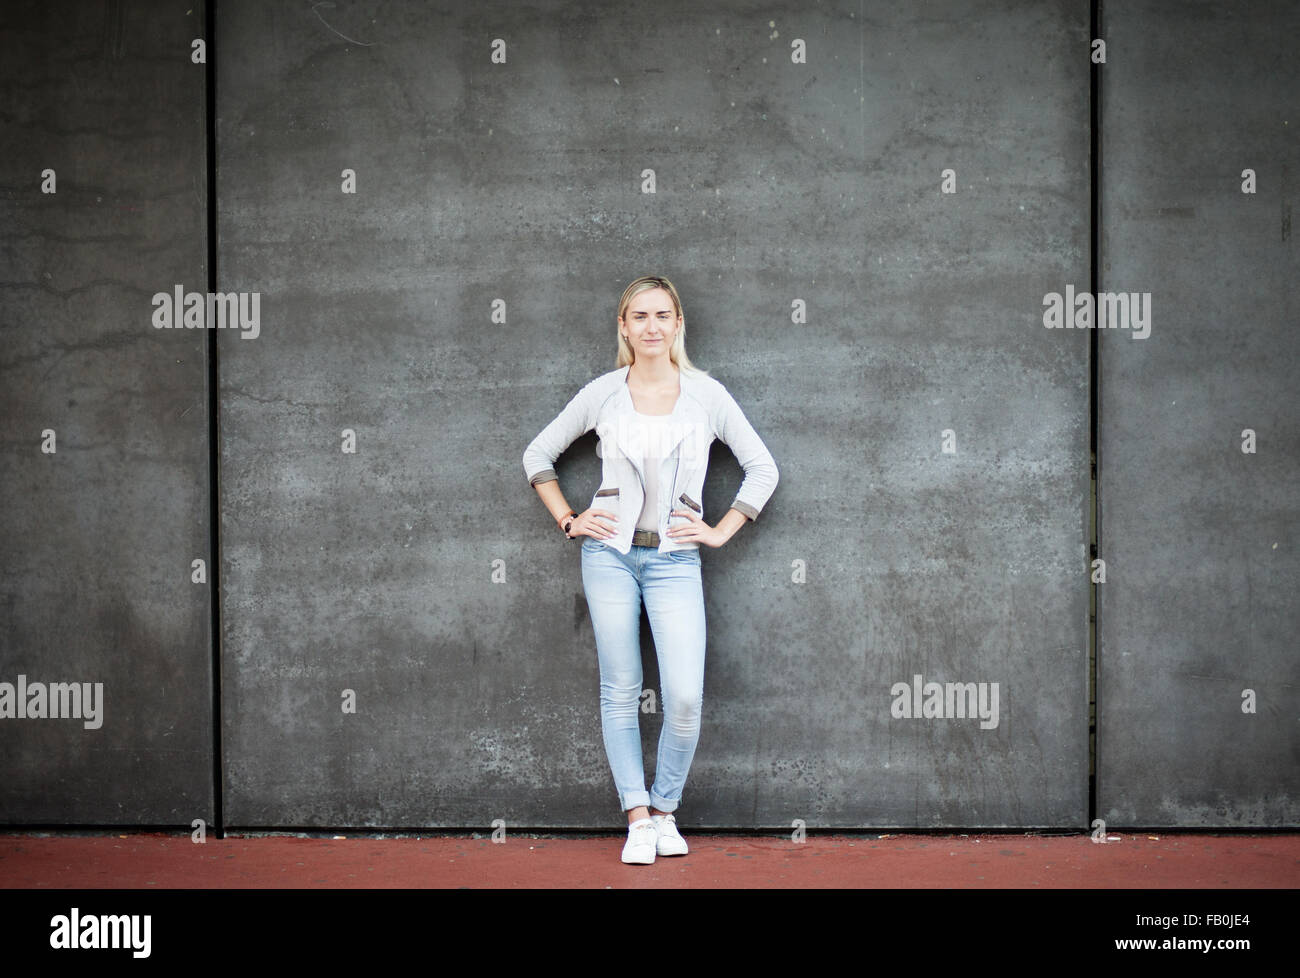 Attractive young woman standing in front of concrete wall Stock Photo